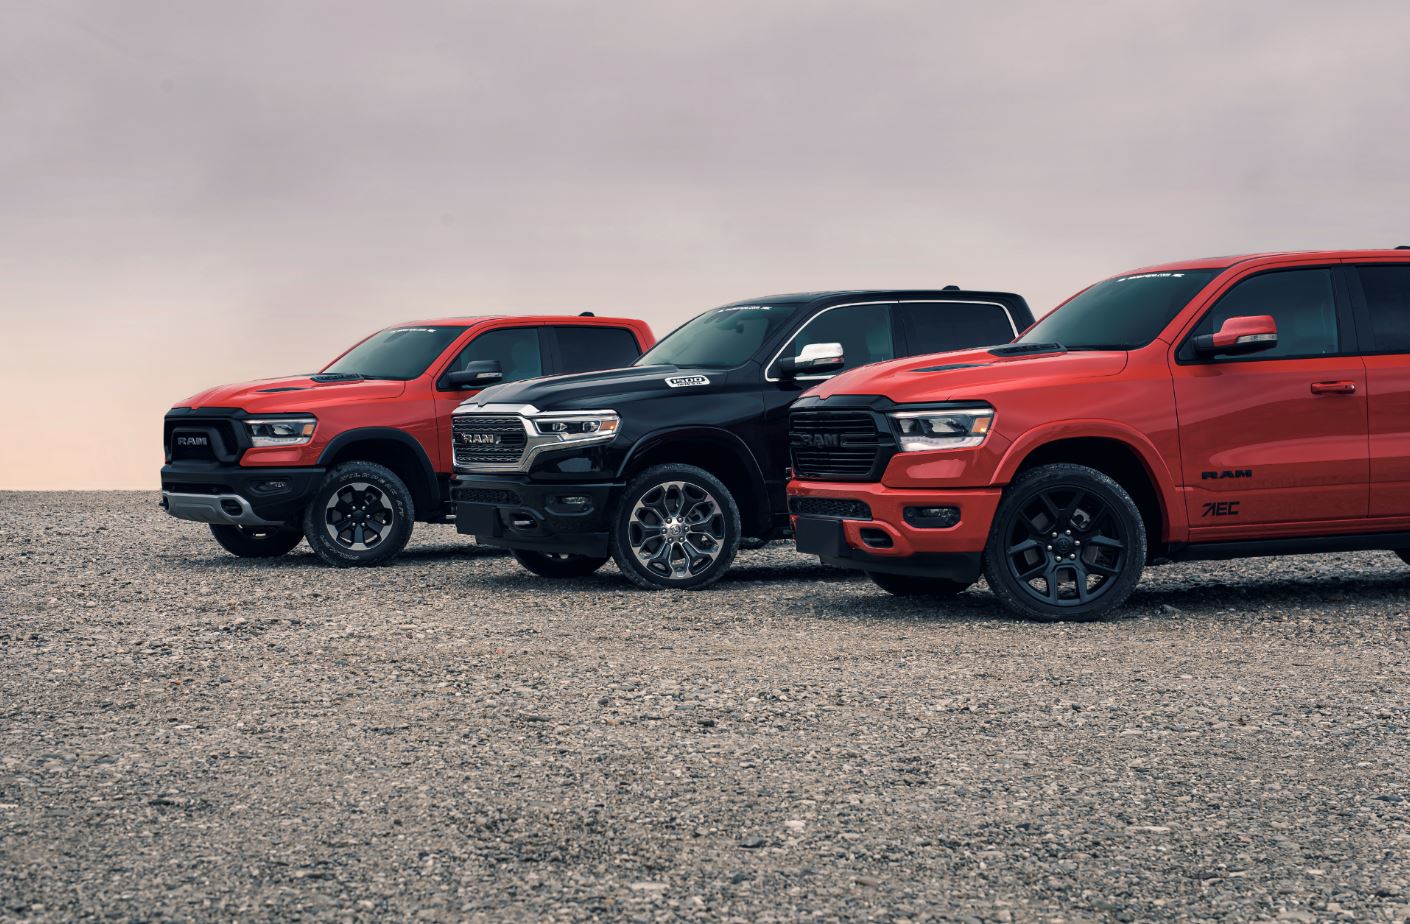 Motherland sikkert Arkæologiske Official Dodge and RAM Importer AEC Europe confirms RAM Trucks can be  registered in the Netherlands regularly according to WLTP emission tests -  AEC